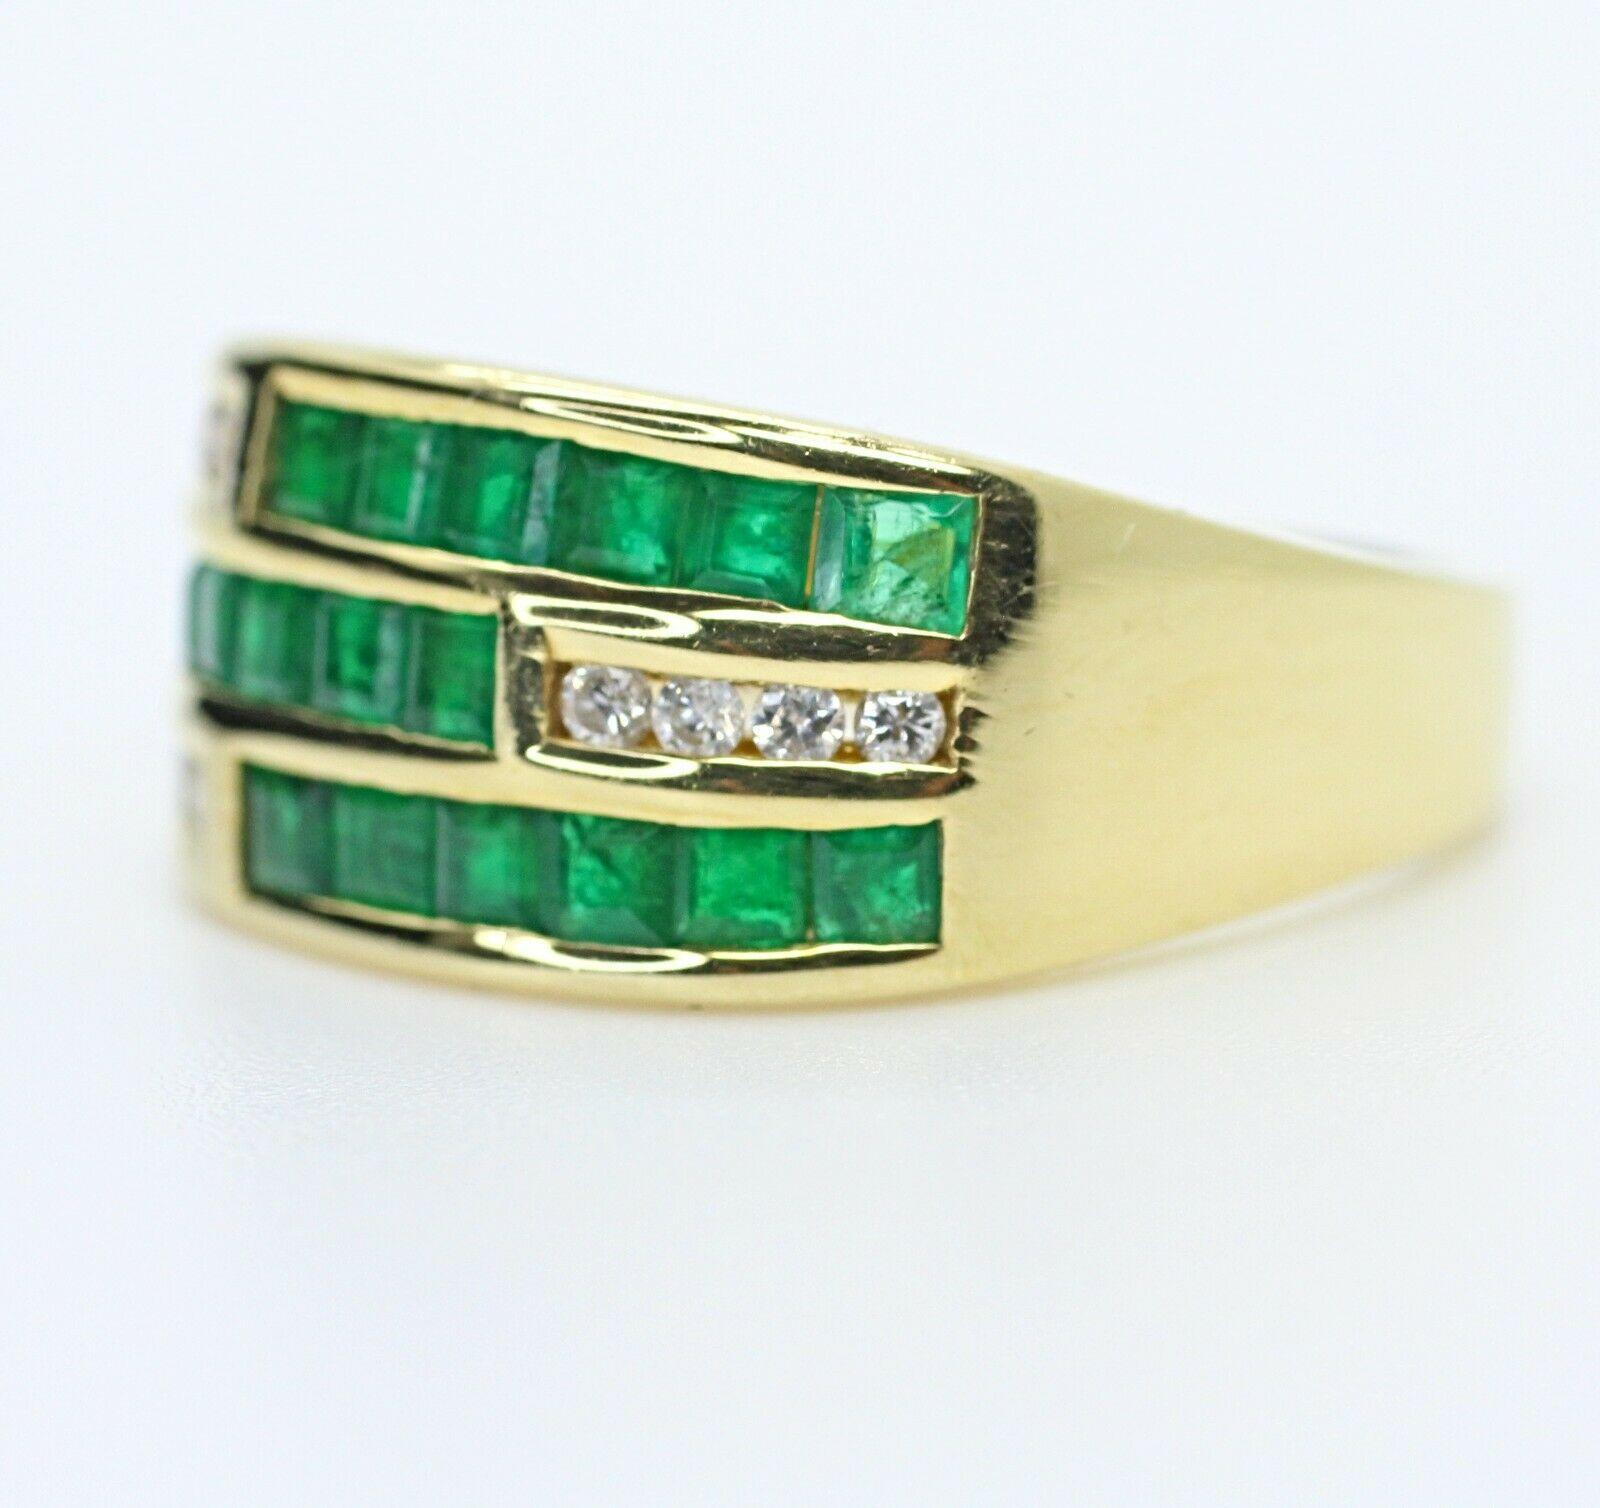 18K YELLOW GOLD COLOMBIAN EMERALD STONE AND ROUND DIAMOND BAND RING
Specifications:
    MAIN stone:  18 COLOMBIAN EMERALD 2.78-2.13MM 
    DIAMOND: 12 PCS ROUND DIAMONDS
    CARAT TOTAL WEIGHT: approx 0.21 CTW
    COLOR/clarity: G/SI2
    brand: